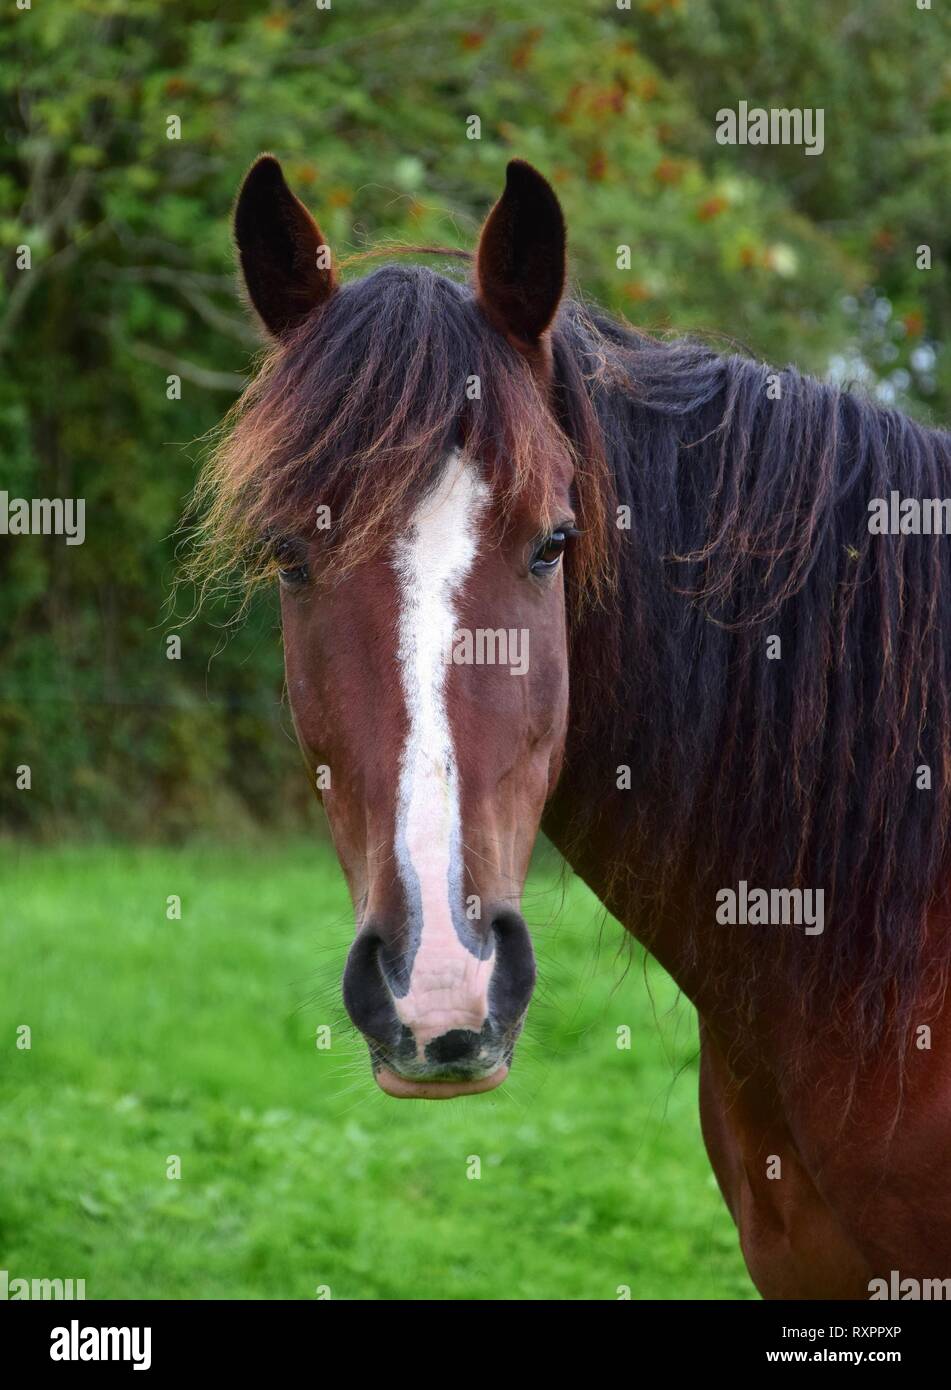 Portrait of a bay horse with a white blaze. Grass an bushes in the background. Ireland. Stock Photo